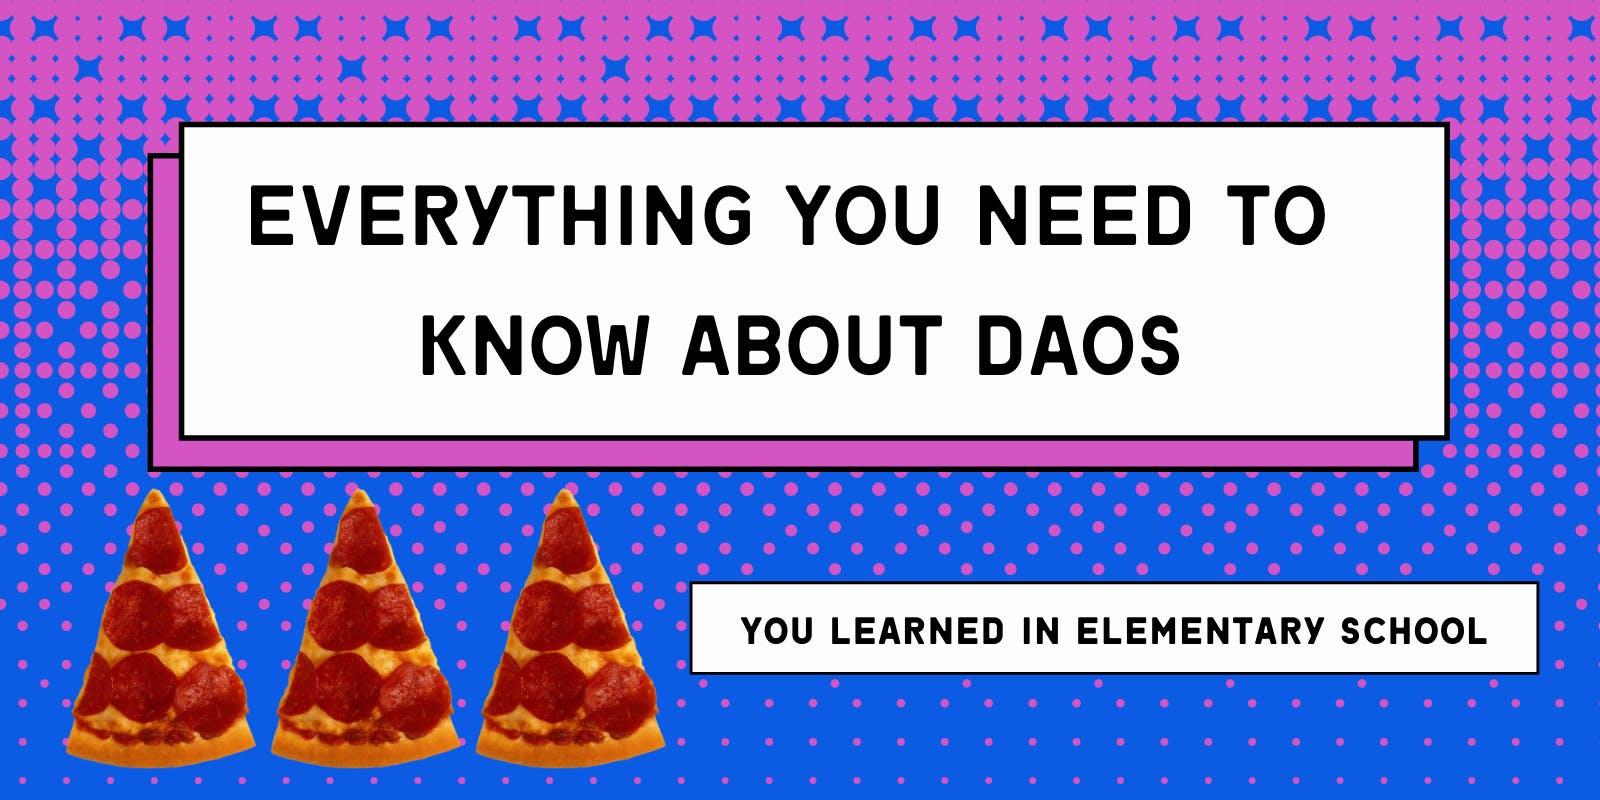 Thumbnail of Everything You Need to Know About DAOs… You Learned in Elementar…